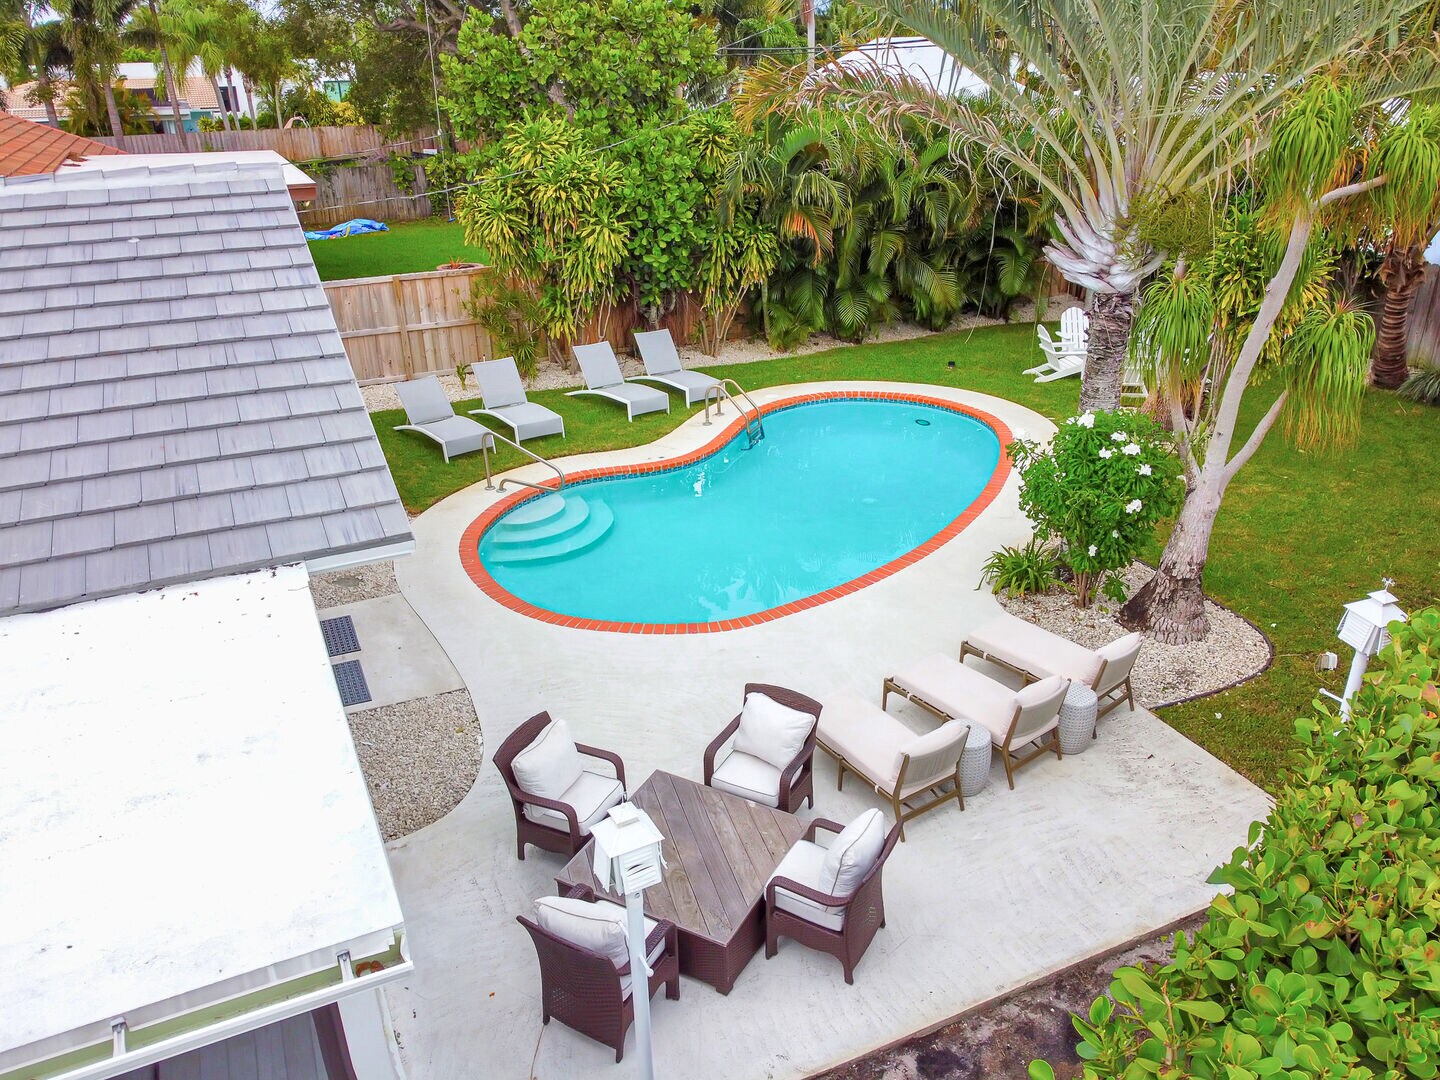 This home has a private yard with Heated Pool and seating options to suit many occasions